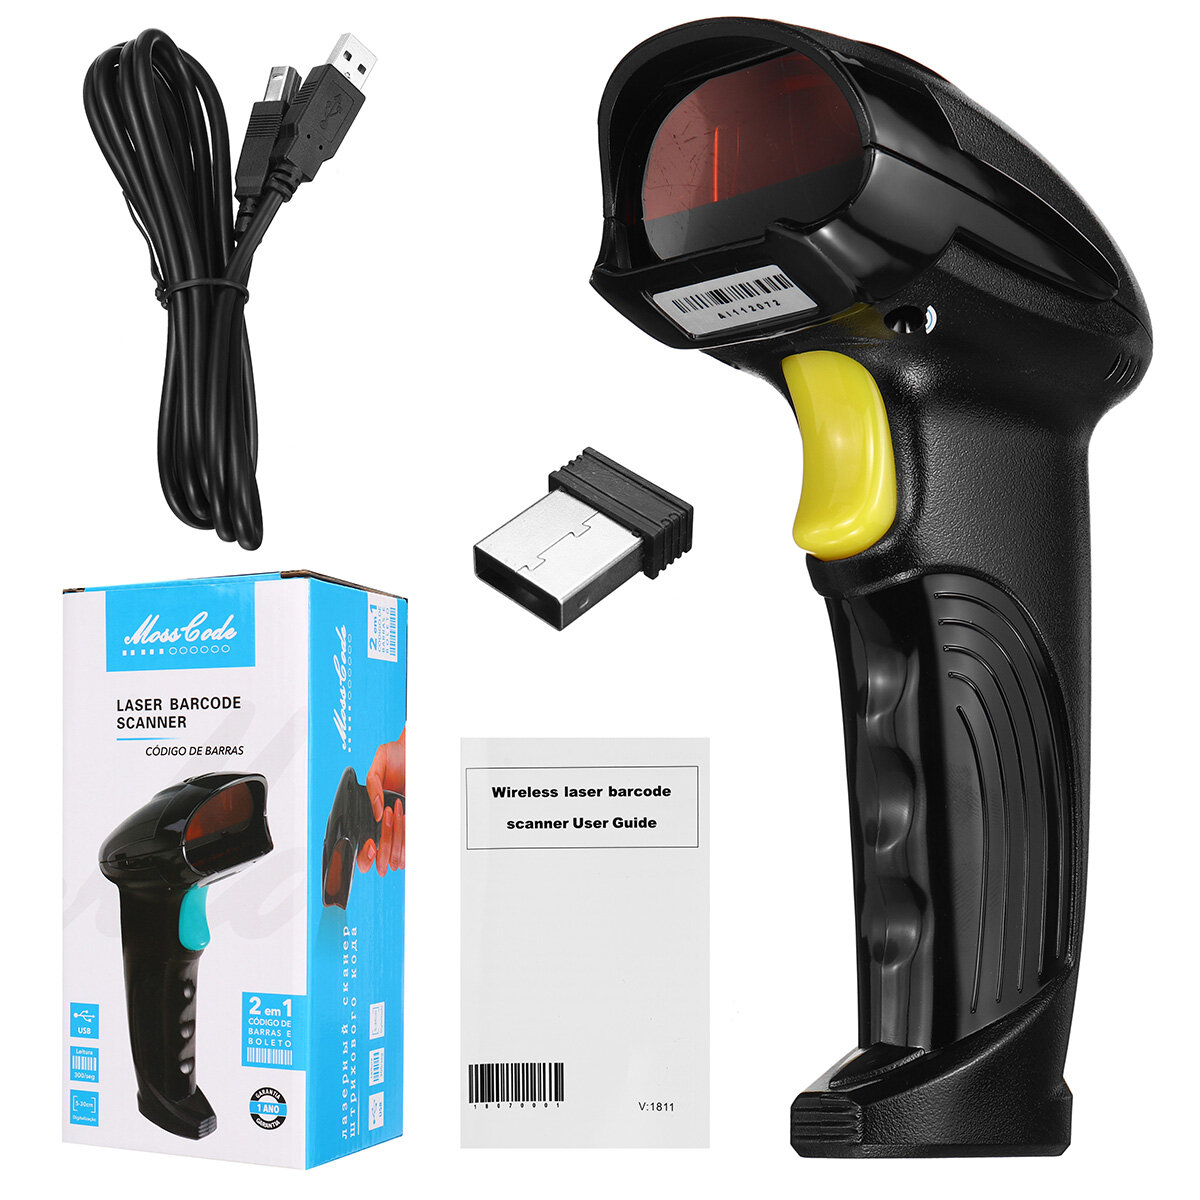 

2.4g 1D Wireless Laser Handheld USB Barcode Scanner Automatic Bar Code Reader Scanner with USB Cable